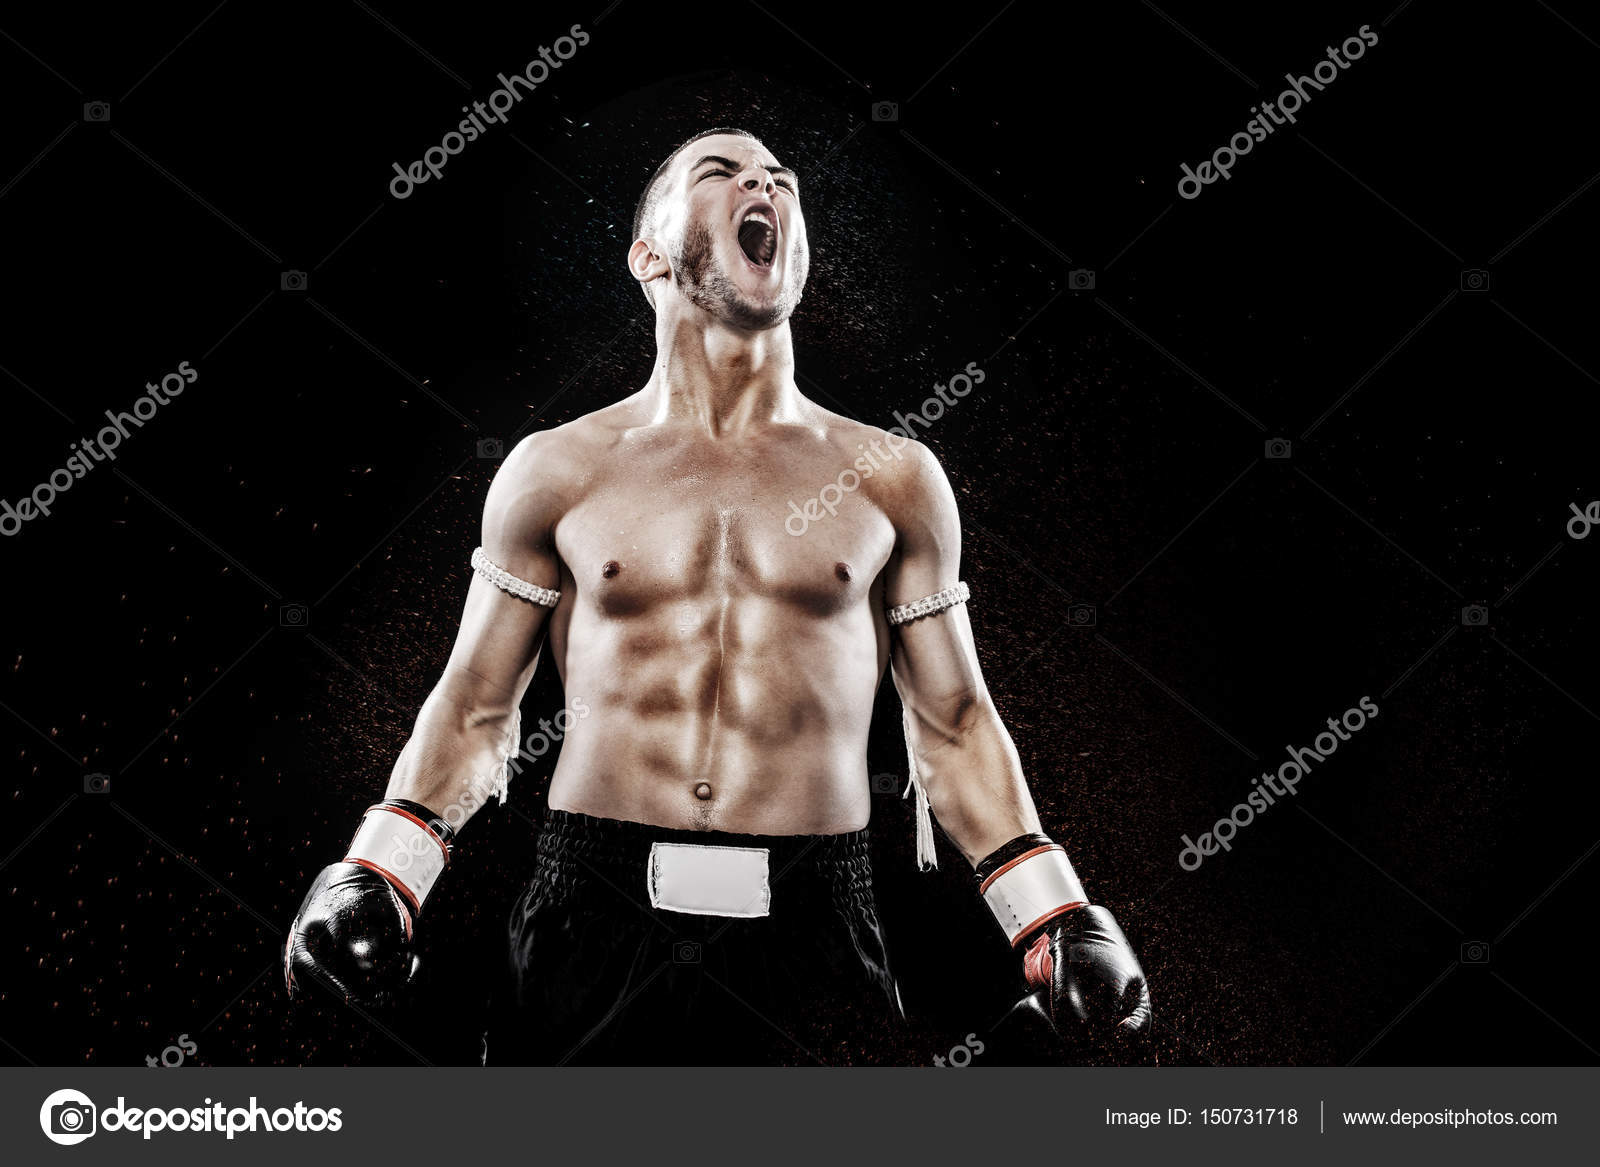 Sportsman Muay Thai Boxer Celebrating Flawless Victory in Boxing Cage.  Isolated on Black Background with Smoke. Copy Stock Image - Image of  people, handsome: 91121441